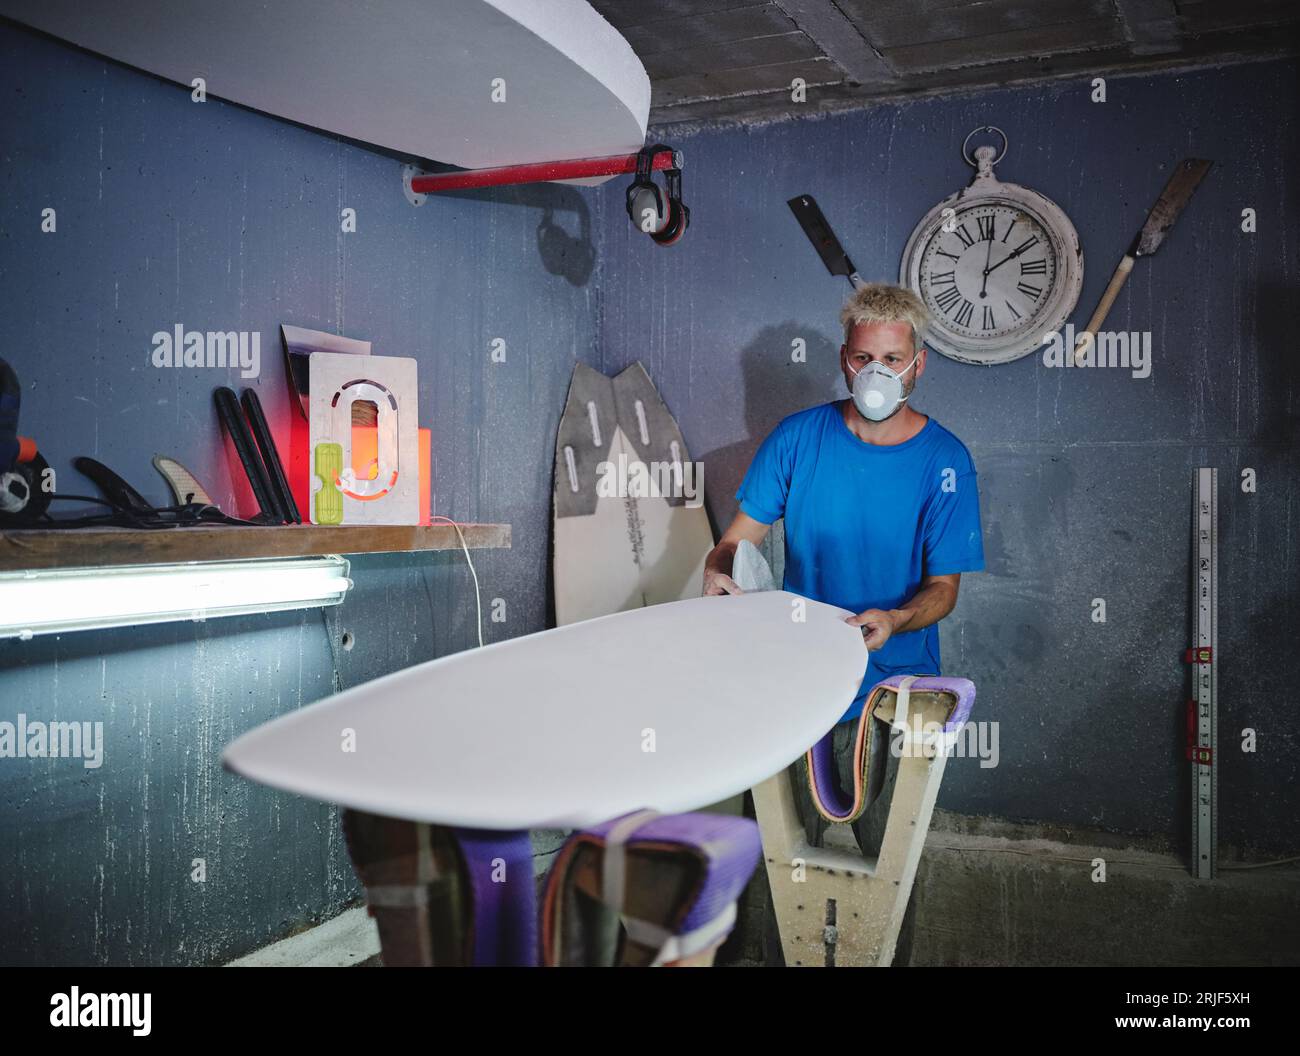 Concentrated blond haired male shaper in respirator mask examining shape of board placed on racks while creating handmade surfboards in workshop Stock Photo